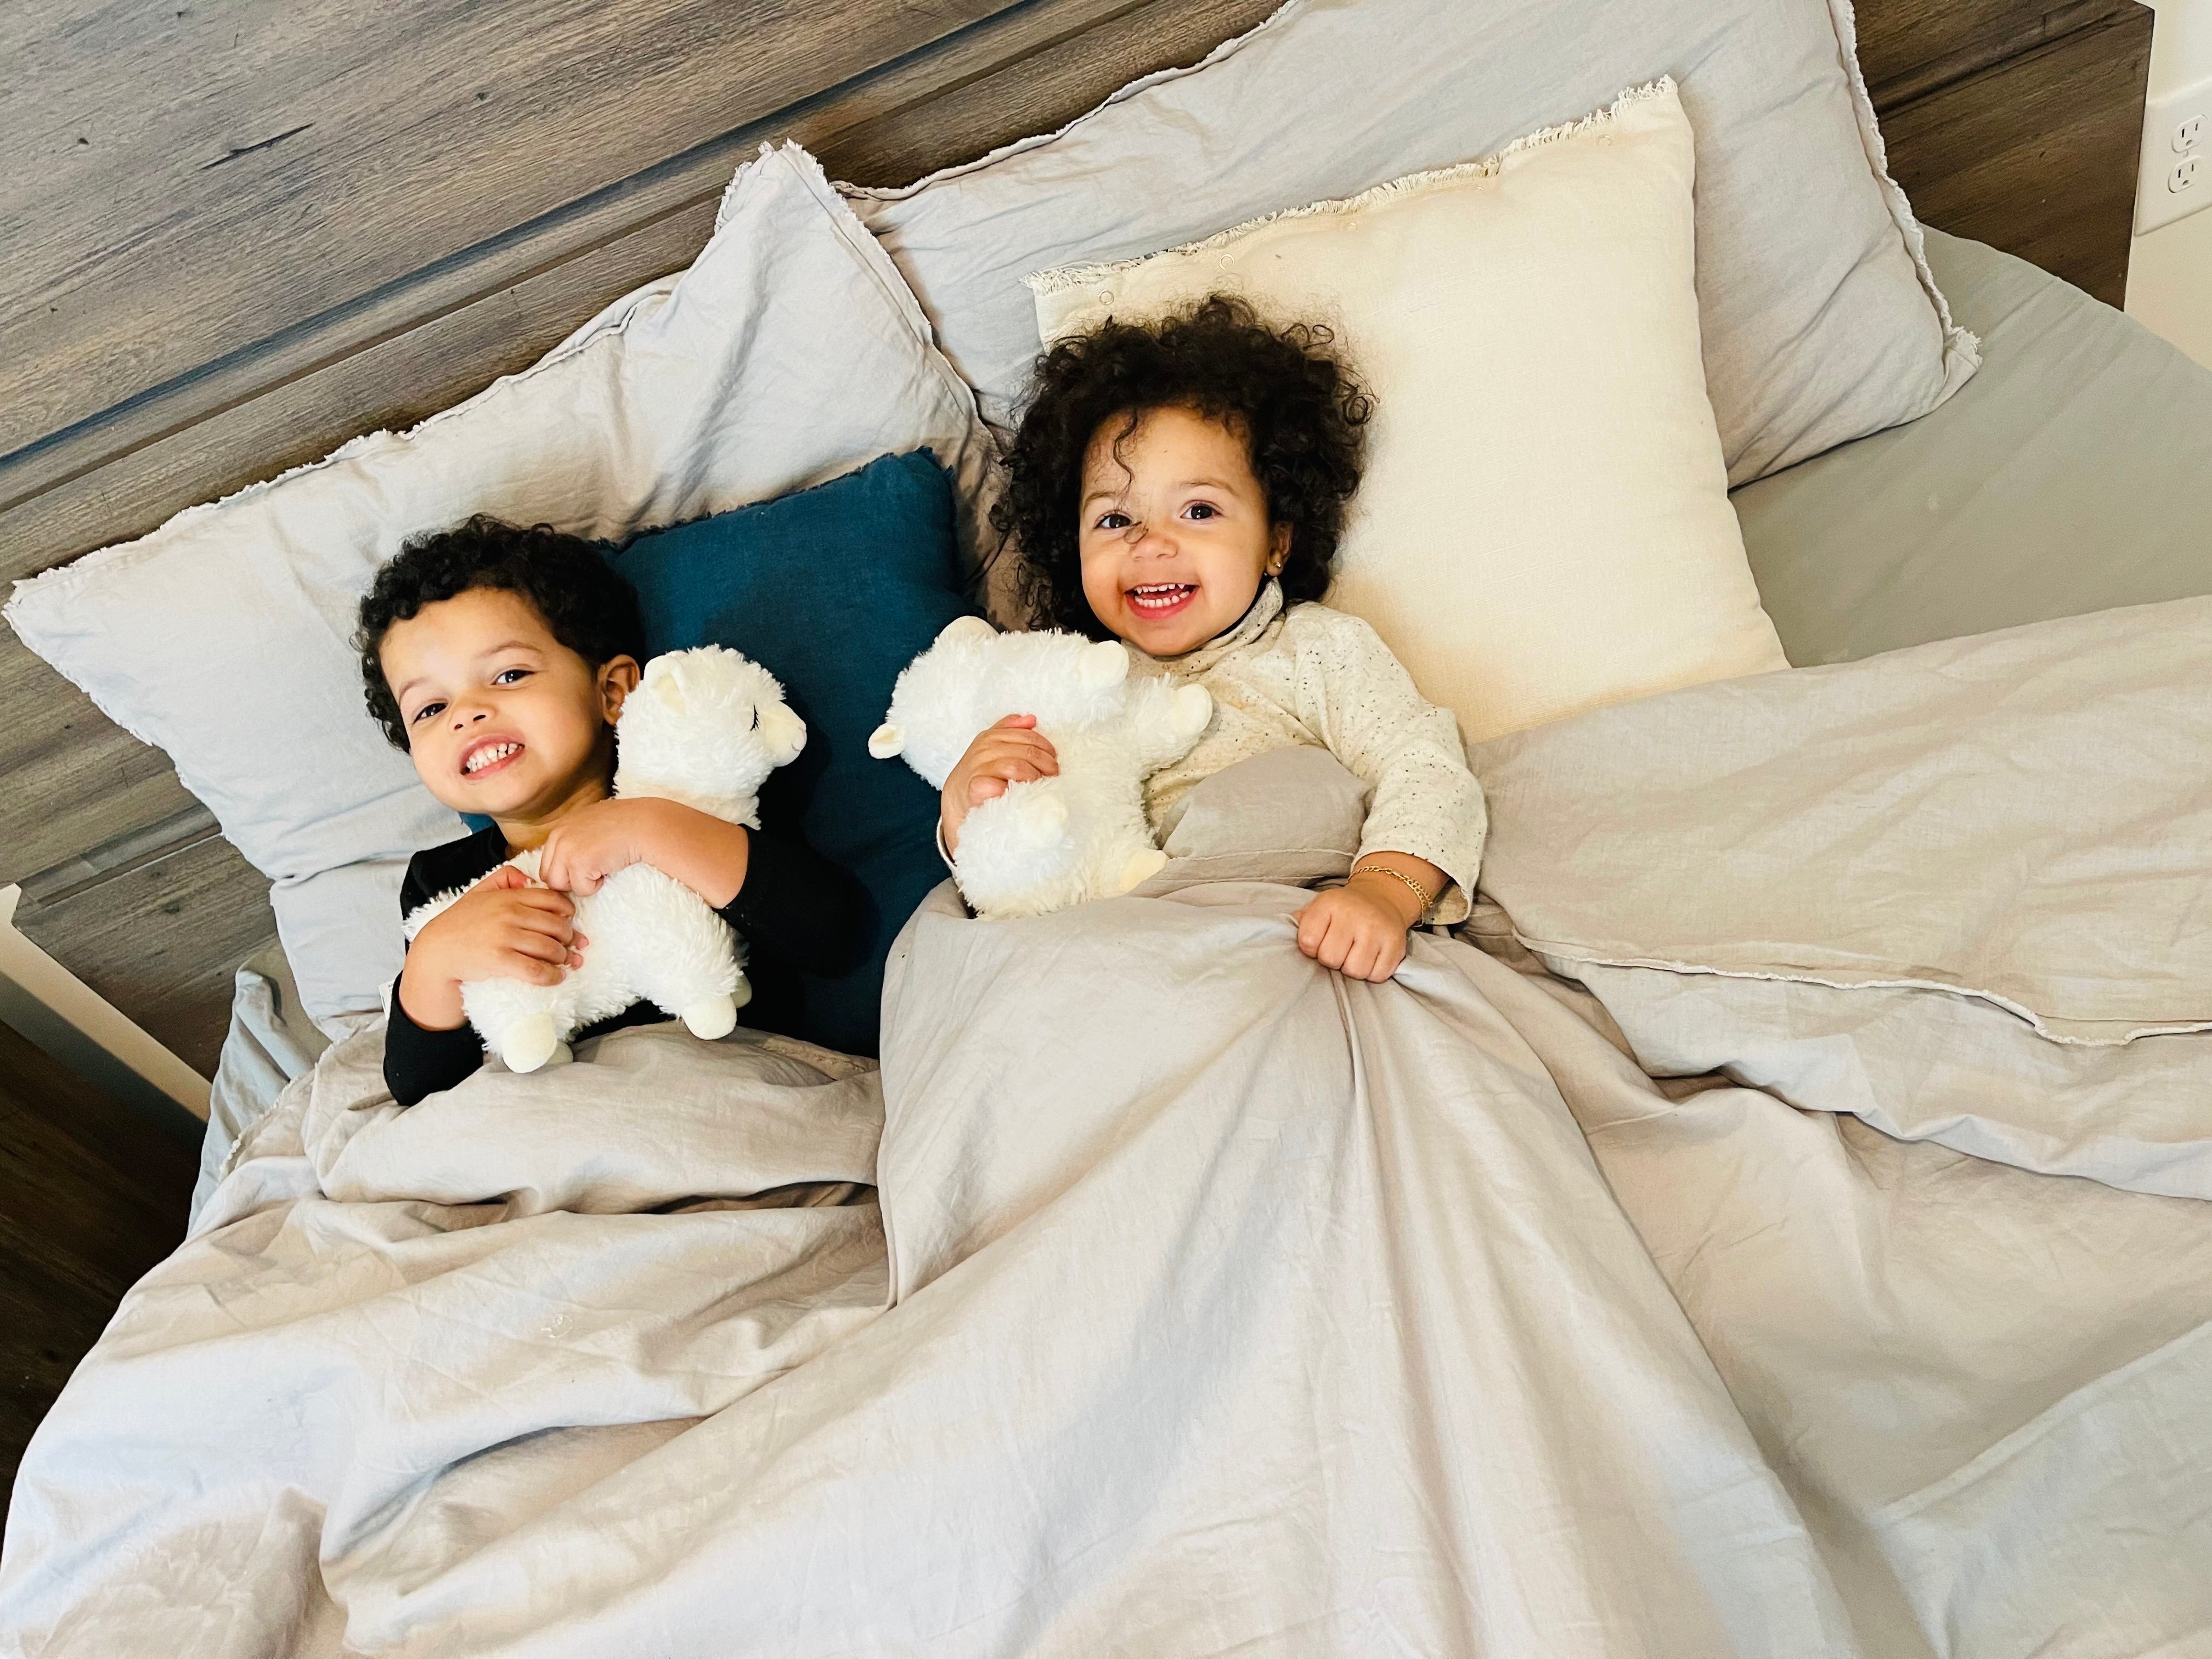 This full sized matching stuffed animal is the perfect accompaniment to the Mookabee Swaddle. Soft and snuggly, it's sure to provide comfort to big brother and big sister - or as your baby graduates from their Mookabee lovey.